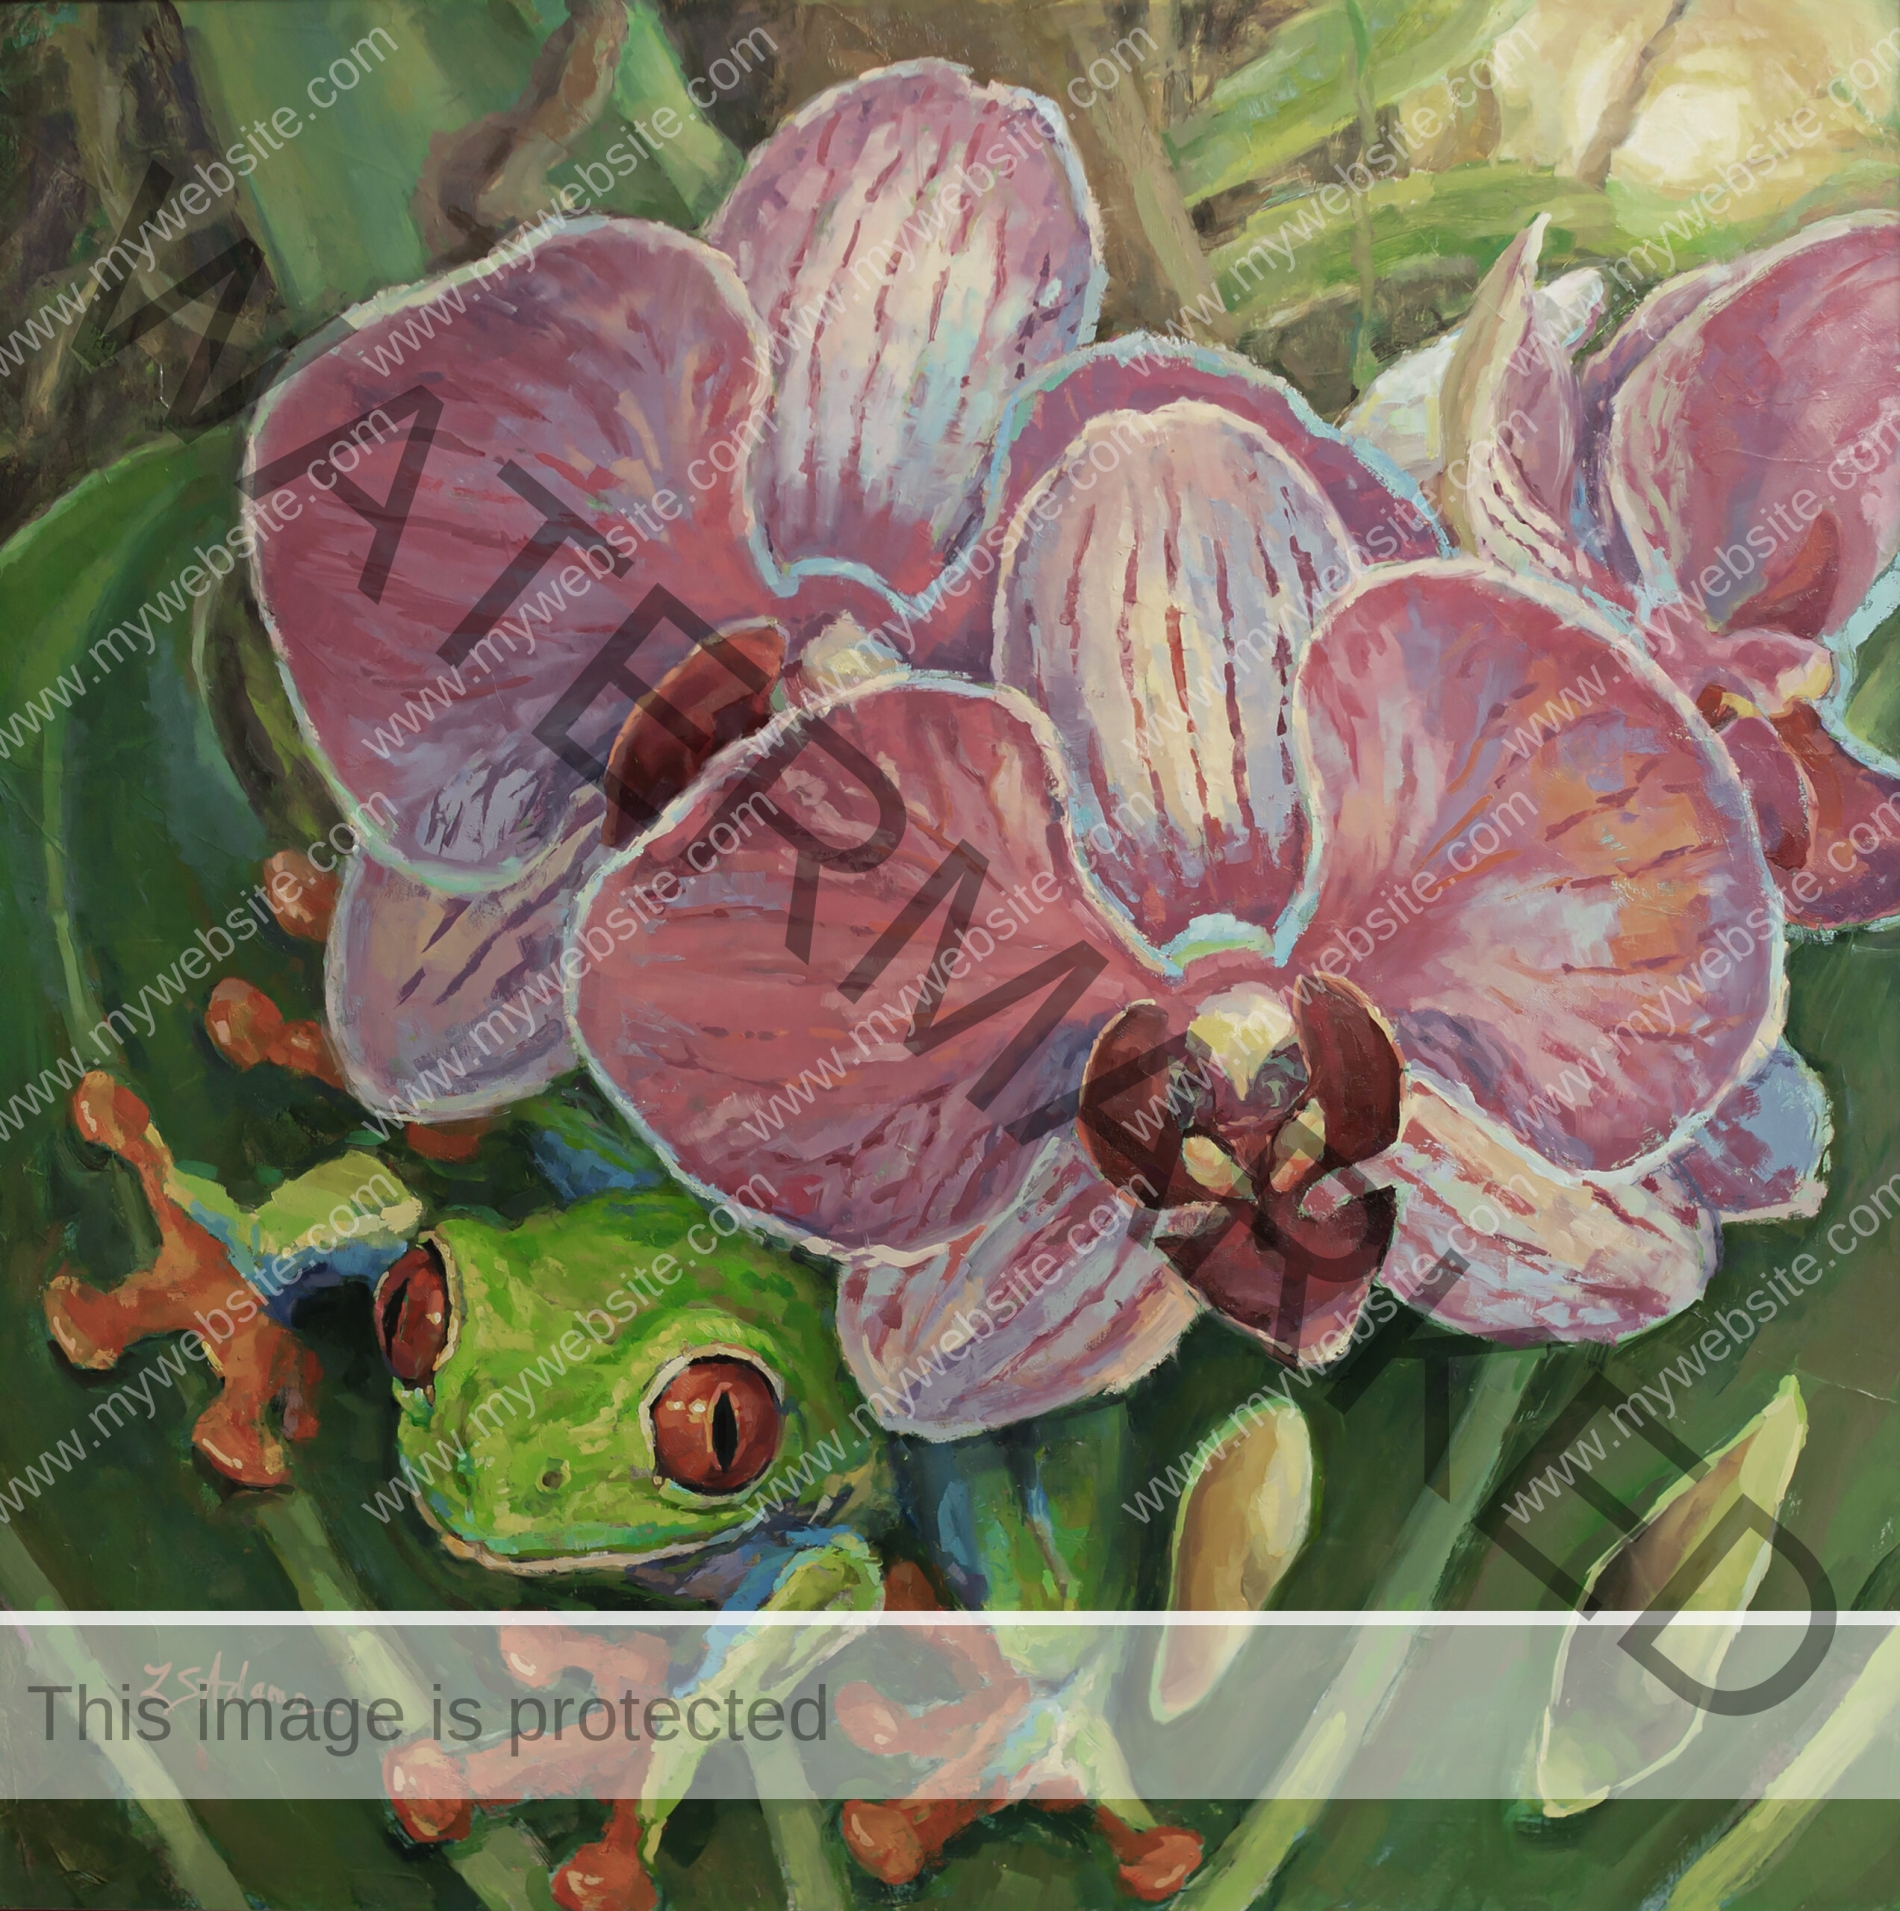 red-eyed tree frog oil painting by Susan Adams, featuring a frog emerging from underneath a pink orchid nestled amidst the lush foliage.